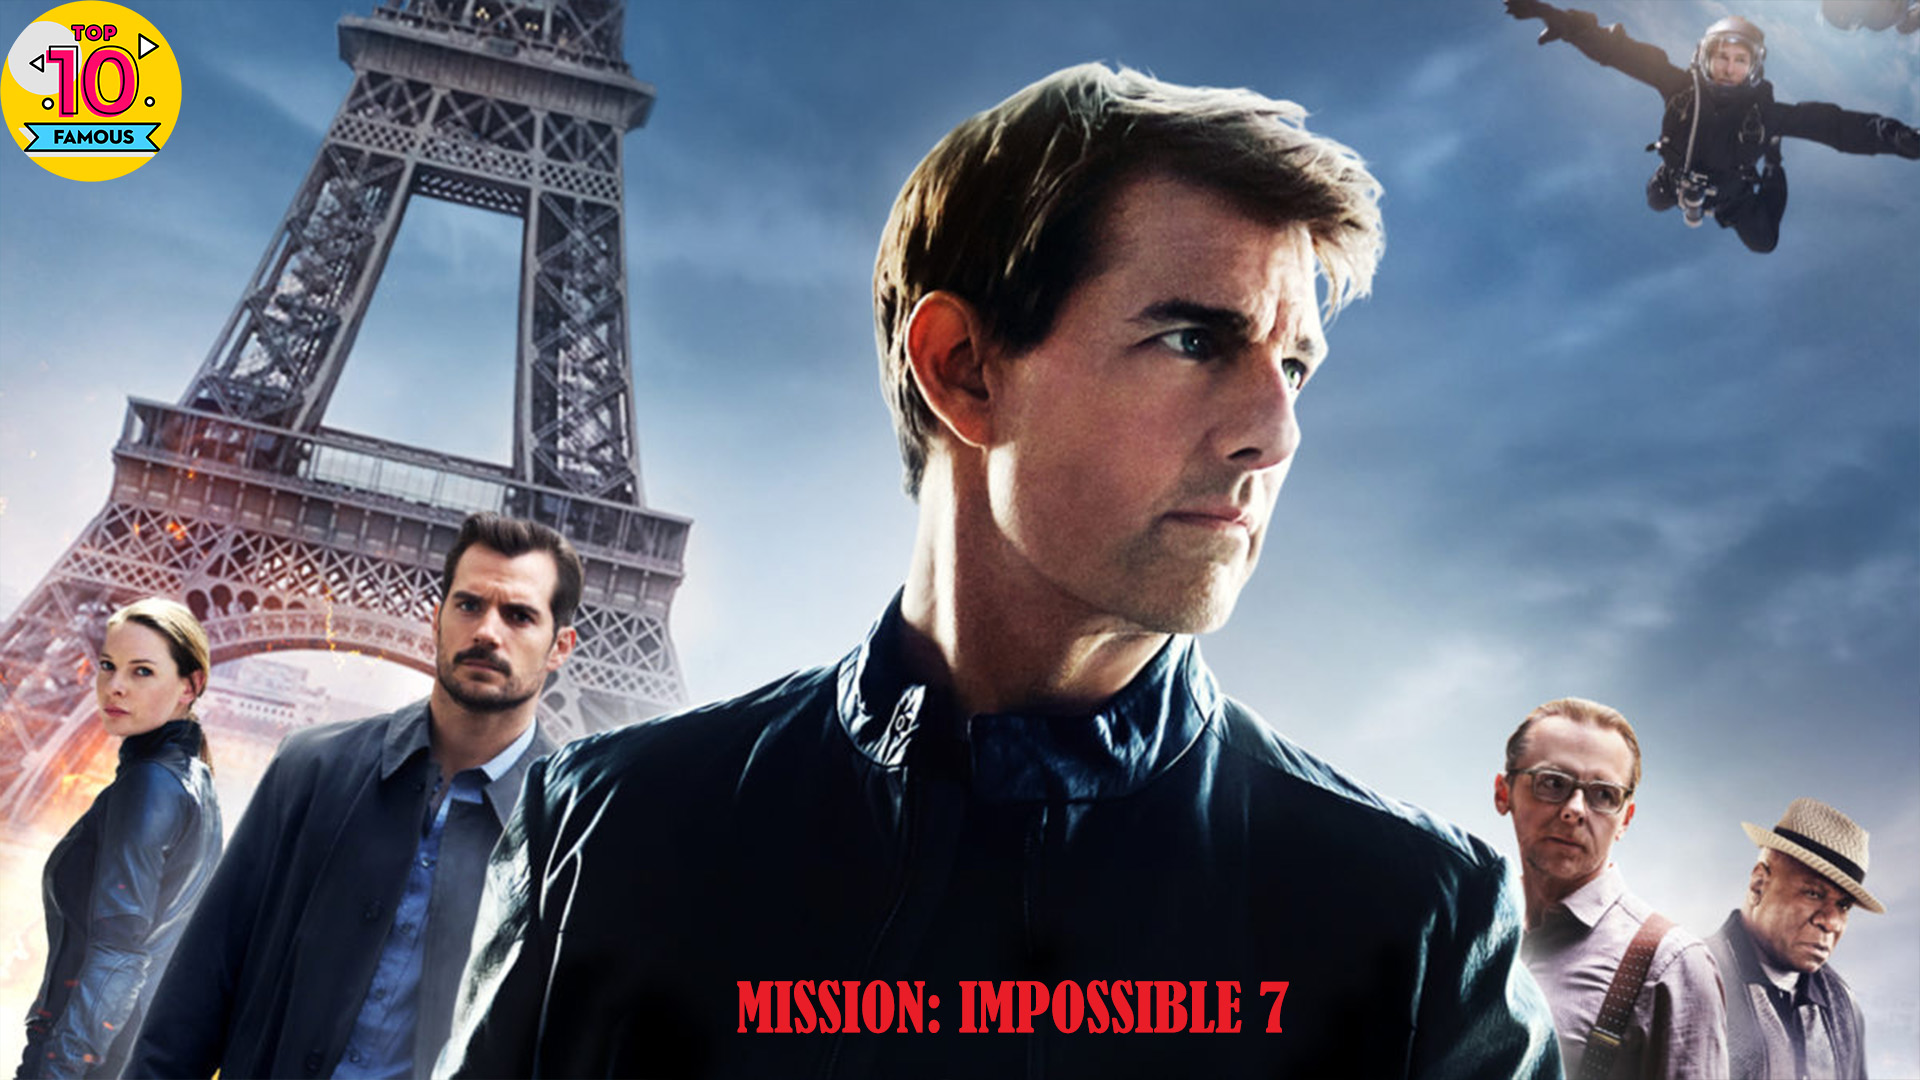 New movies of Tom Cruise TopTenFamous.co